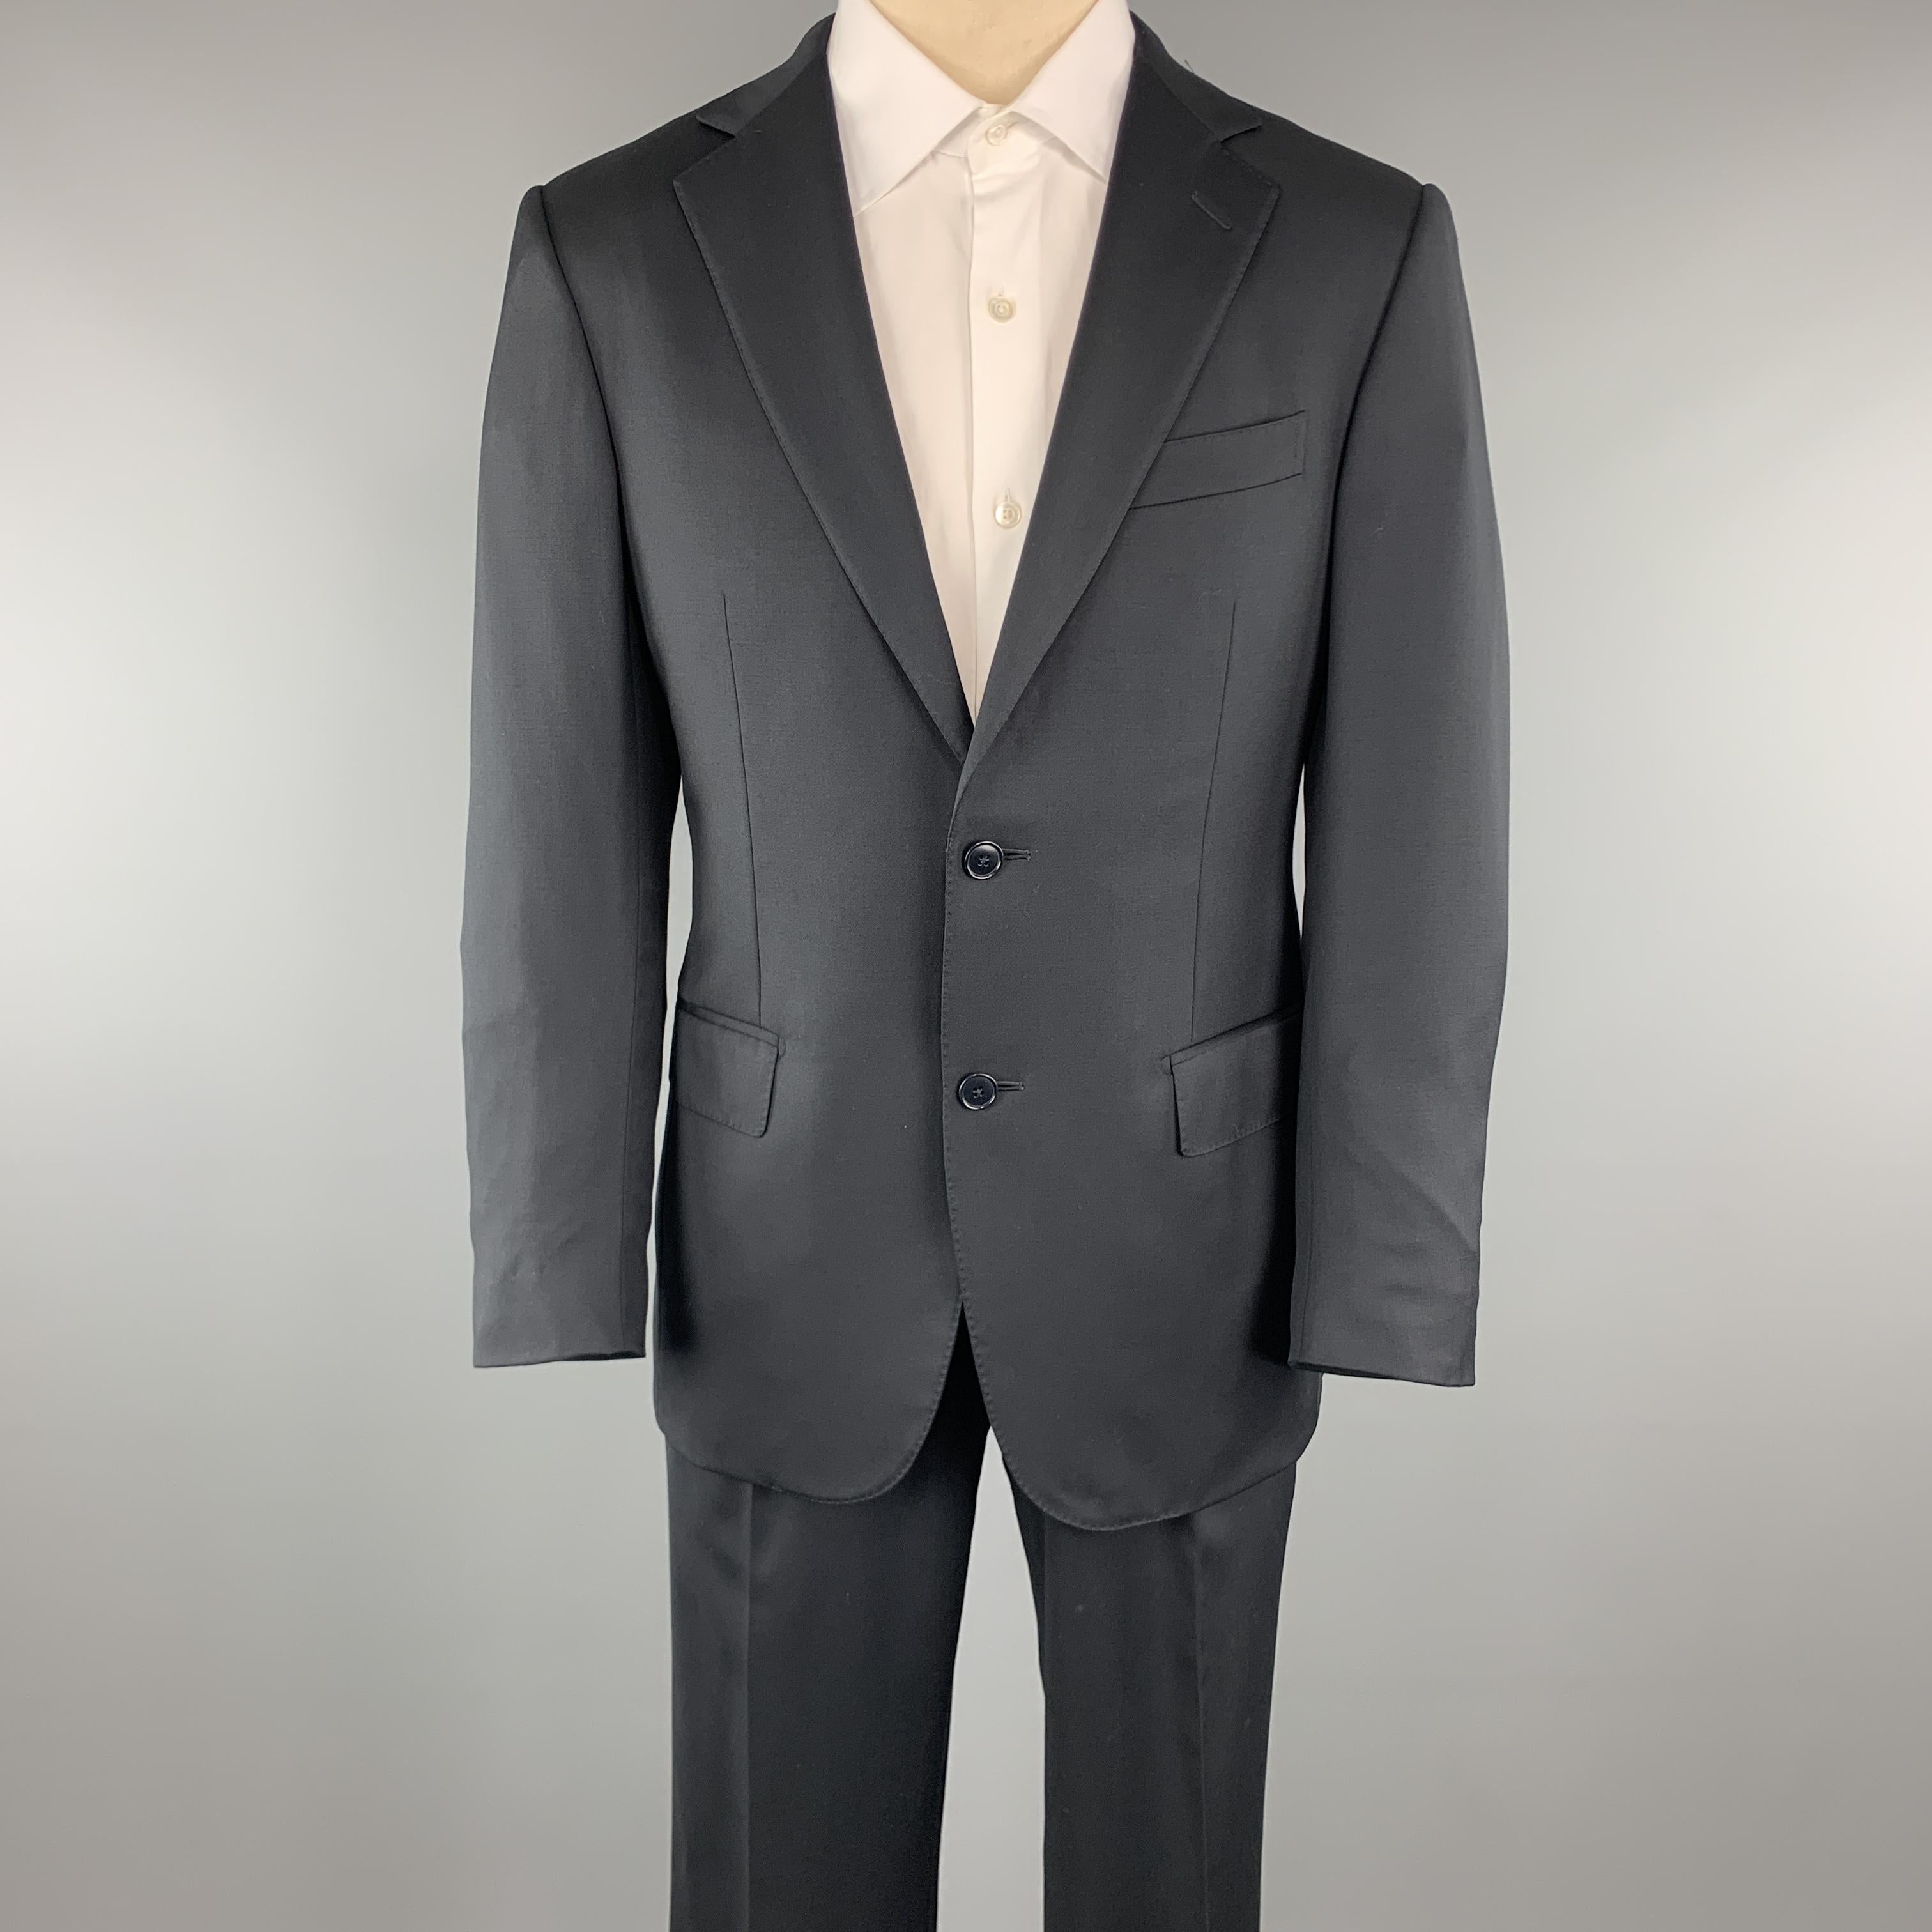 ERMENEGILDO ZEGNA Suit comes in a navy wool and includes a single breasted, two button sport coat with a notch lapel and matching front trousers. Made in Spain.

Excellent Pre-Owned Condition.
Marked: 48

Measurements:

-Jacket
Shoulder: 18 in.